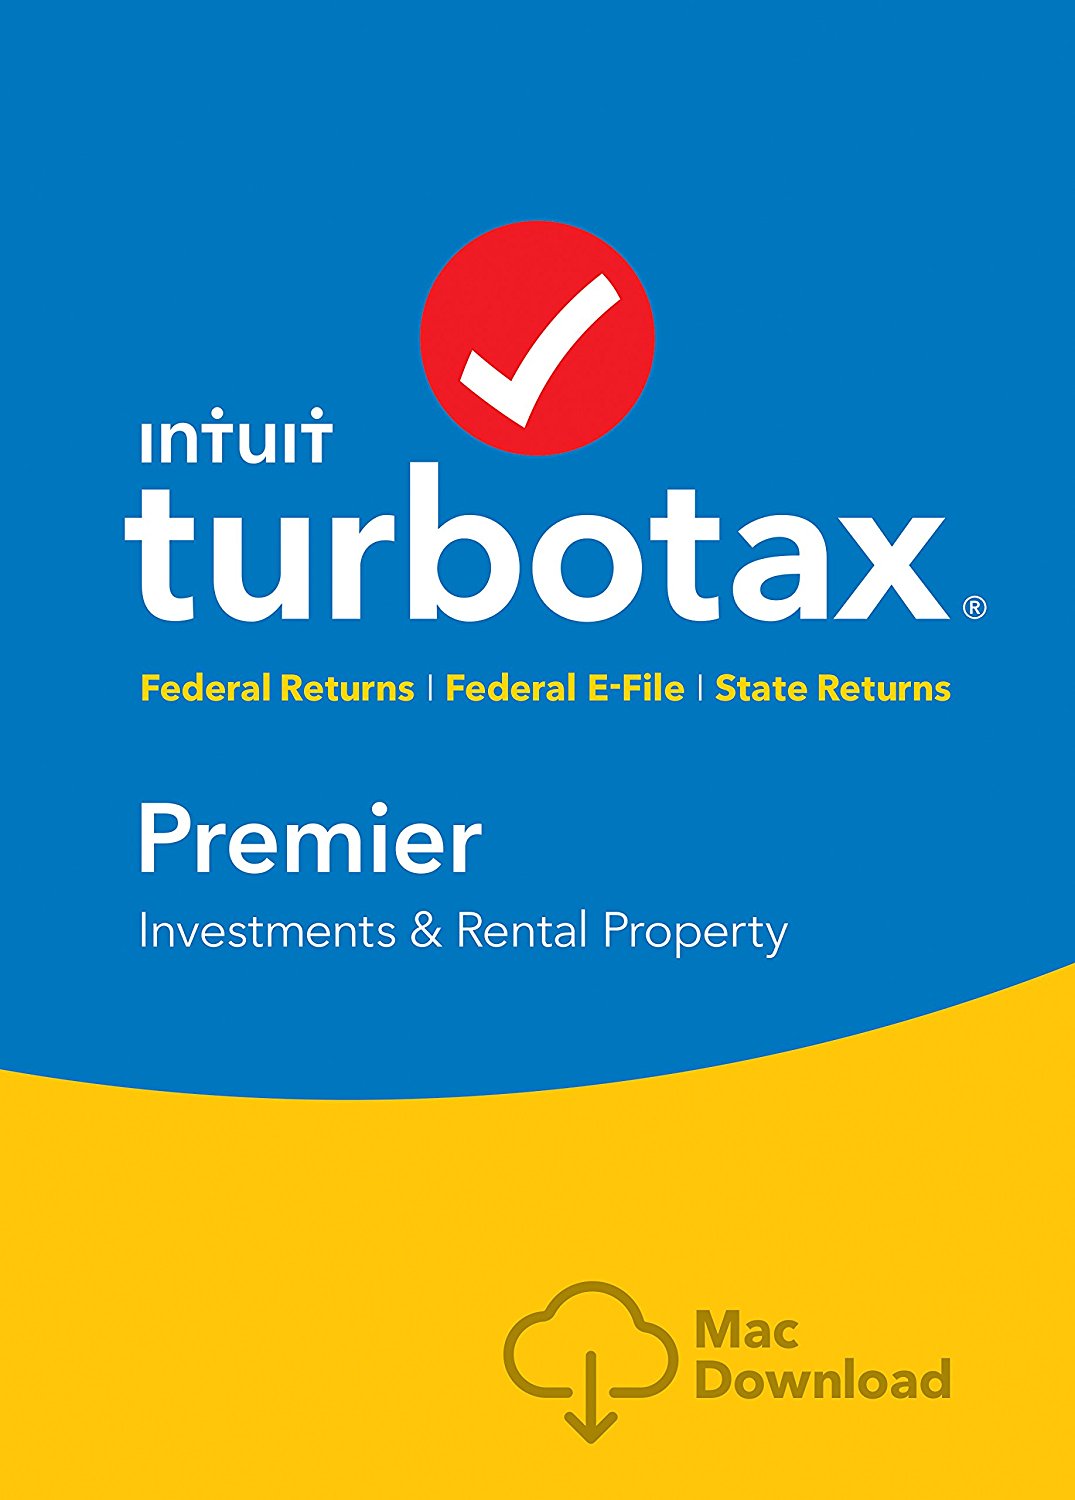 Turbotax Home And Business 2014 Download energymn